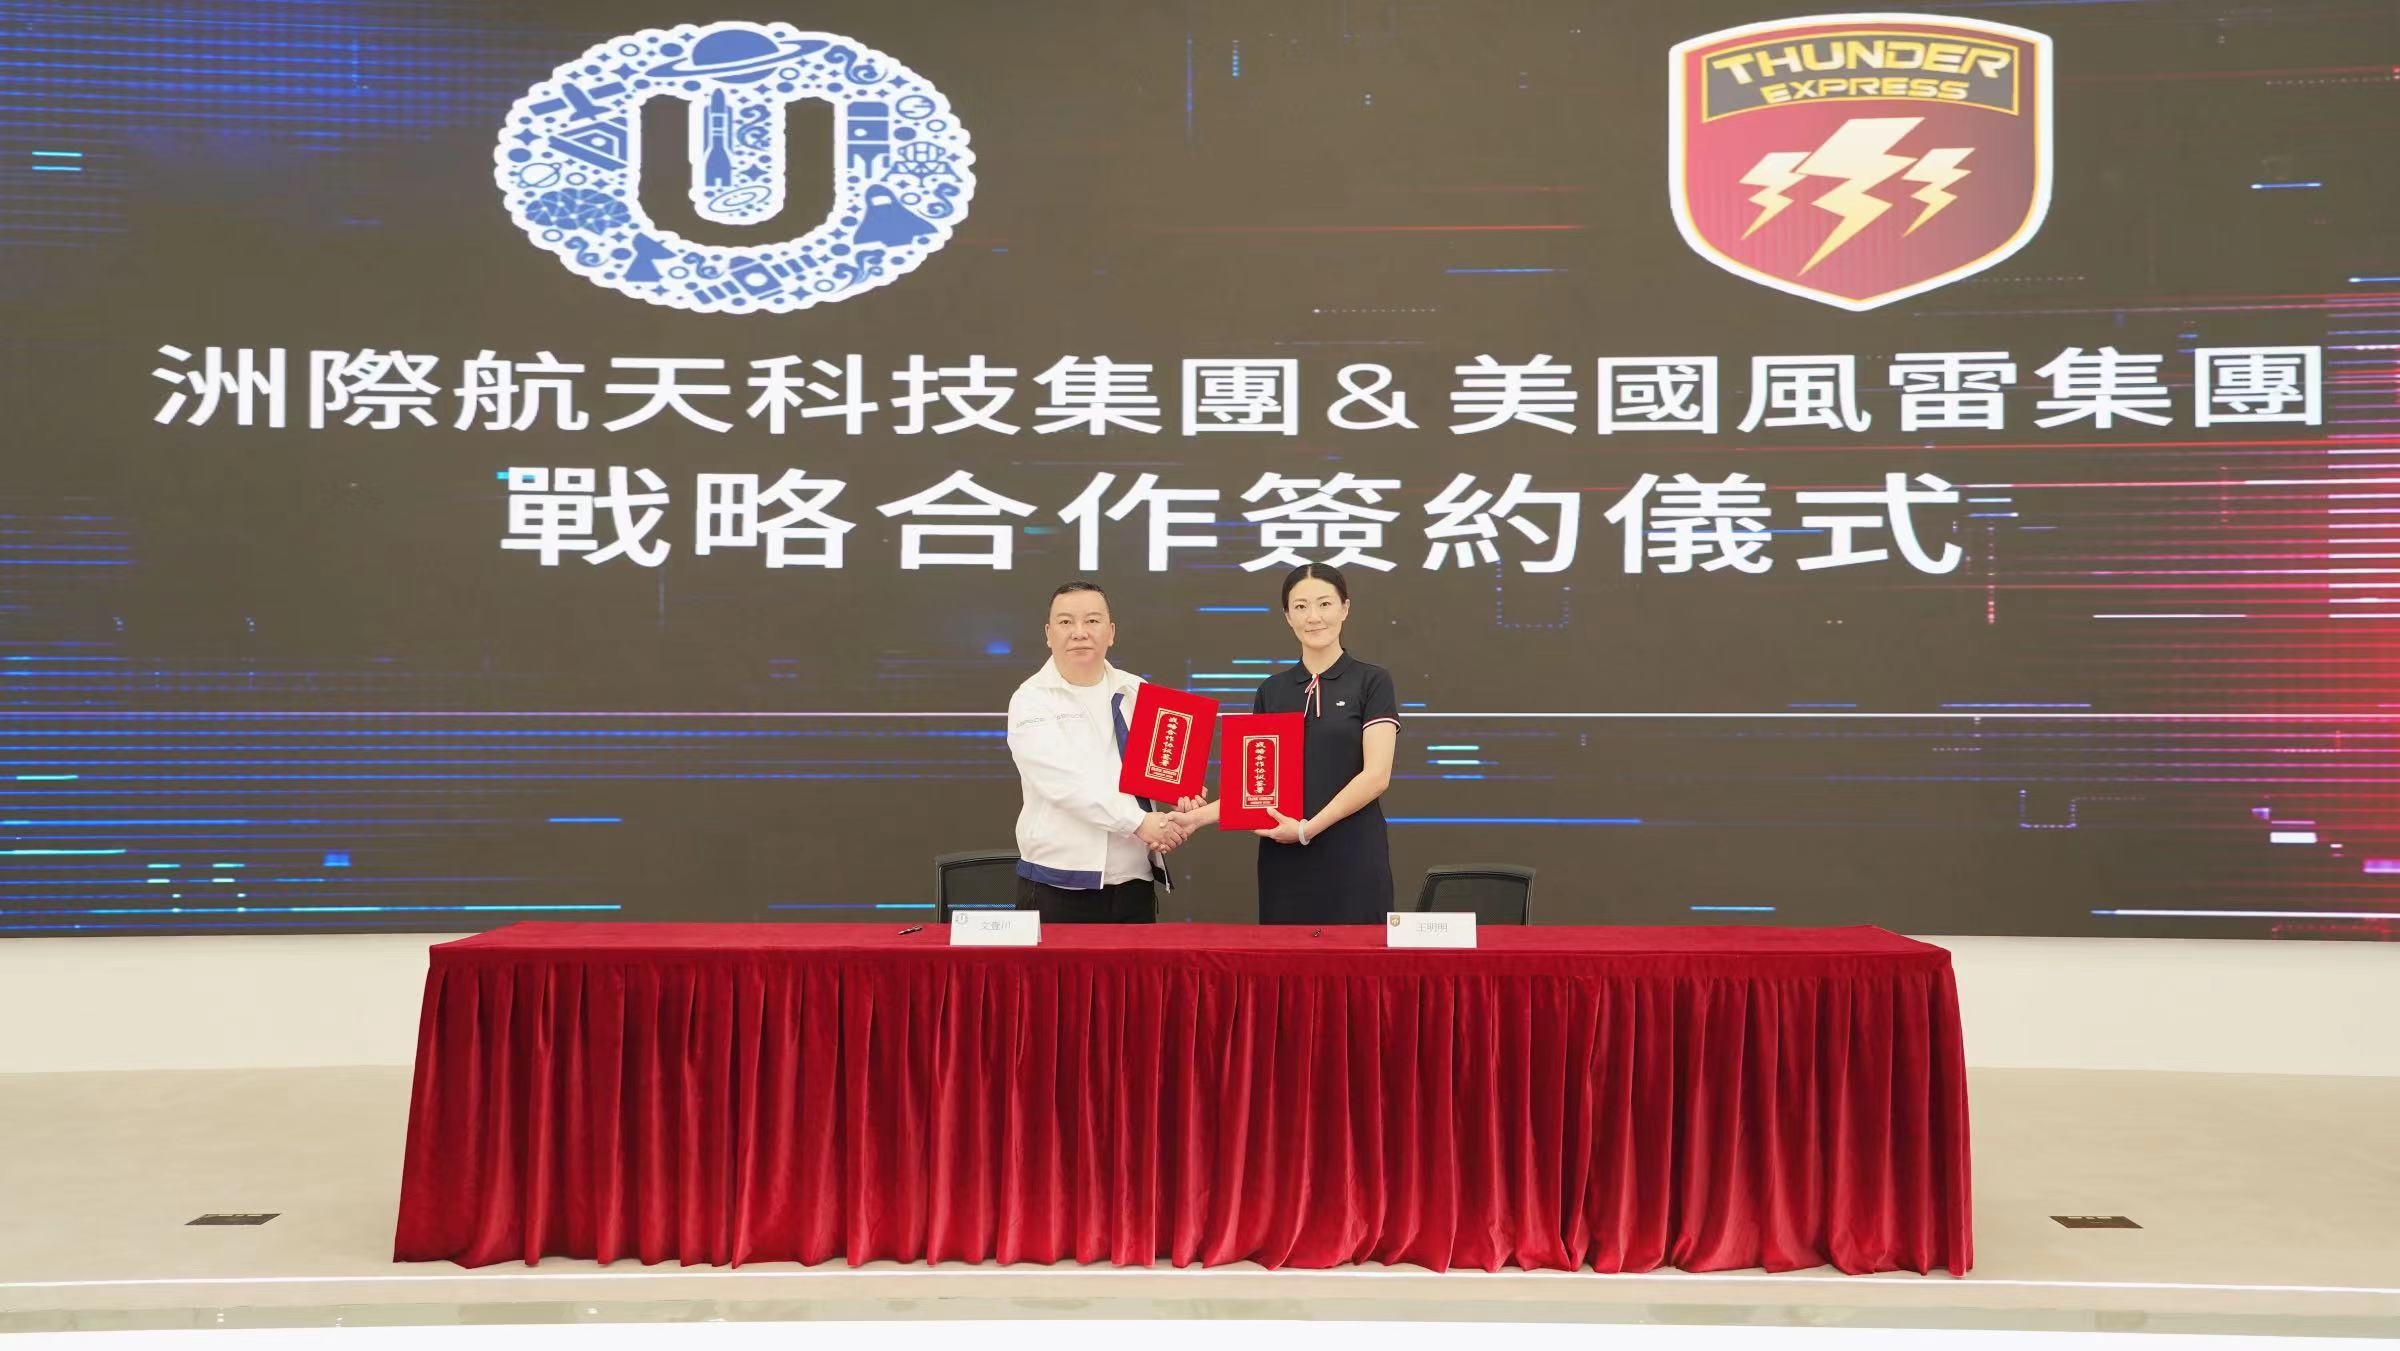 USPACE Signs Strategic Cooperation Agreement UCETC, and Thunder International Group INC